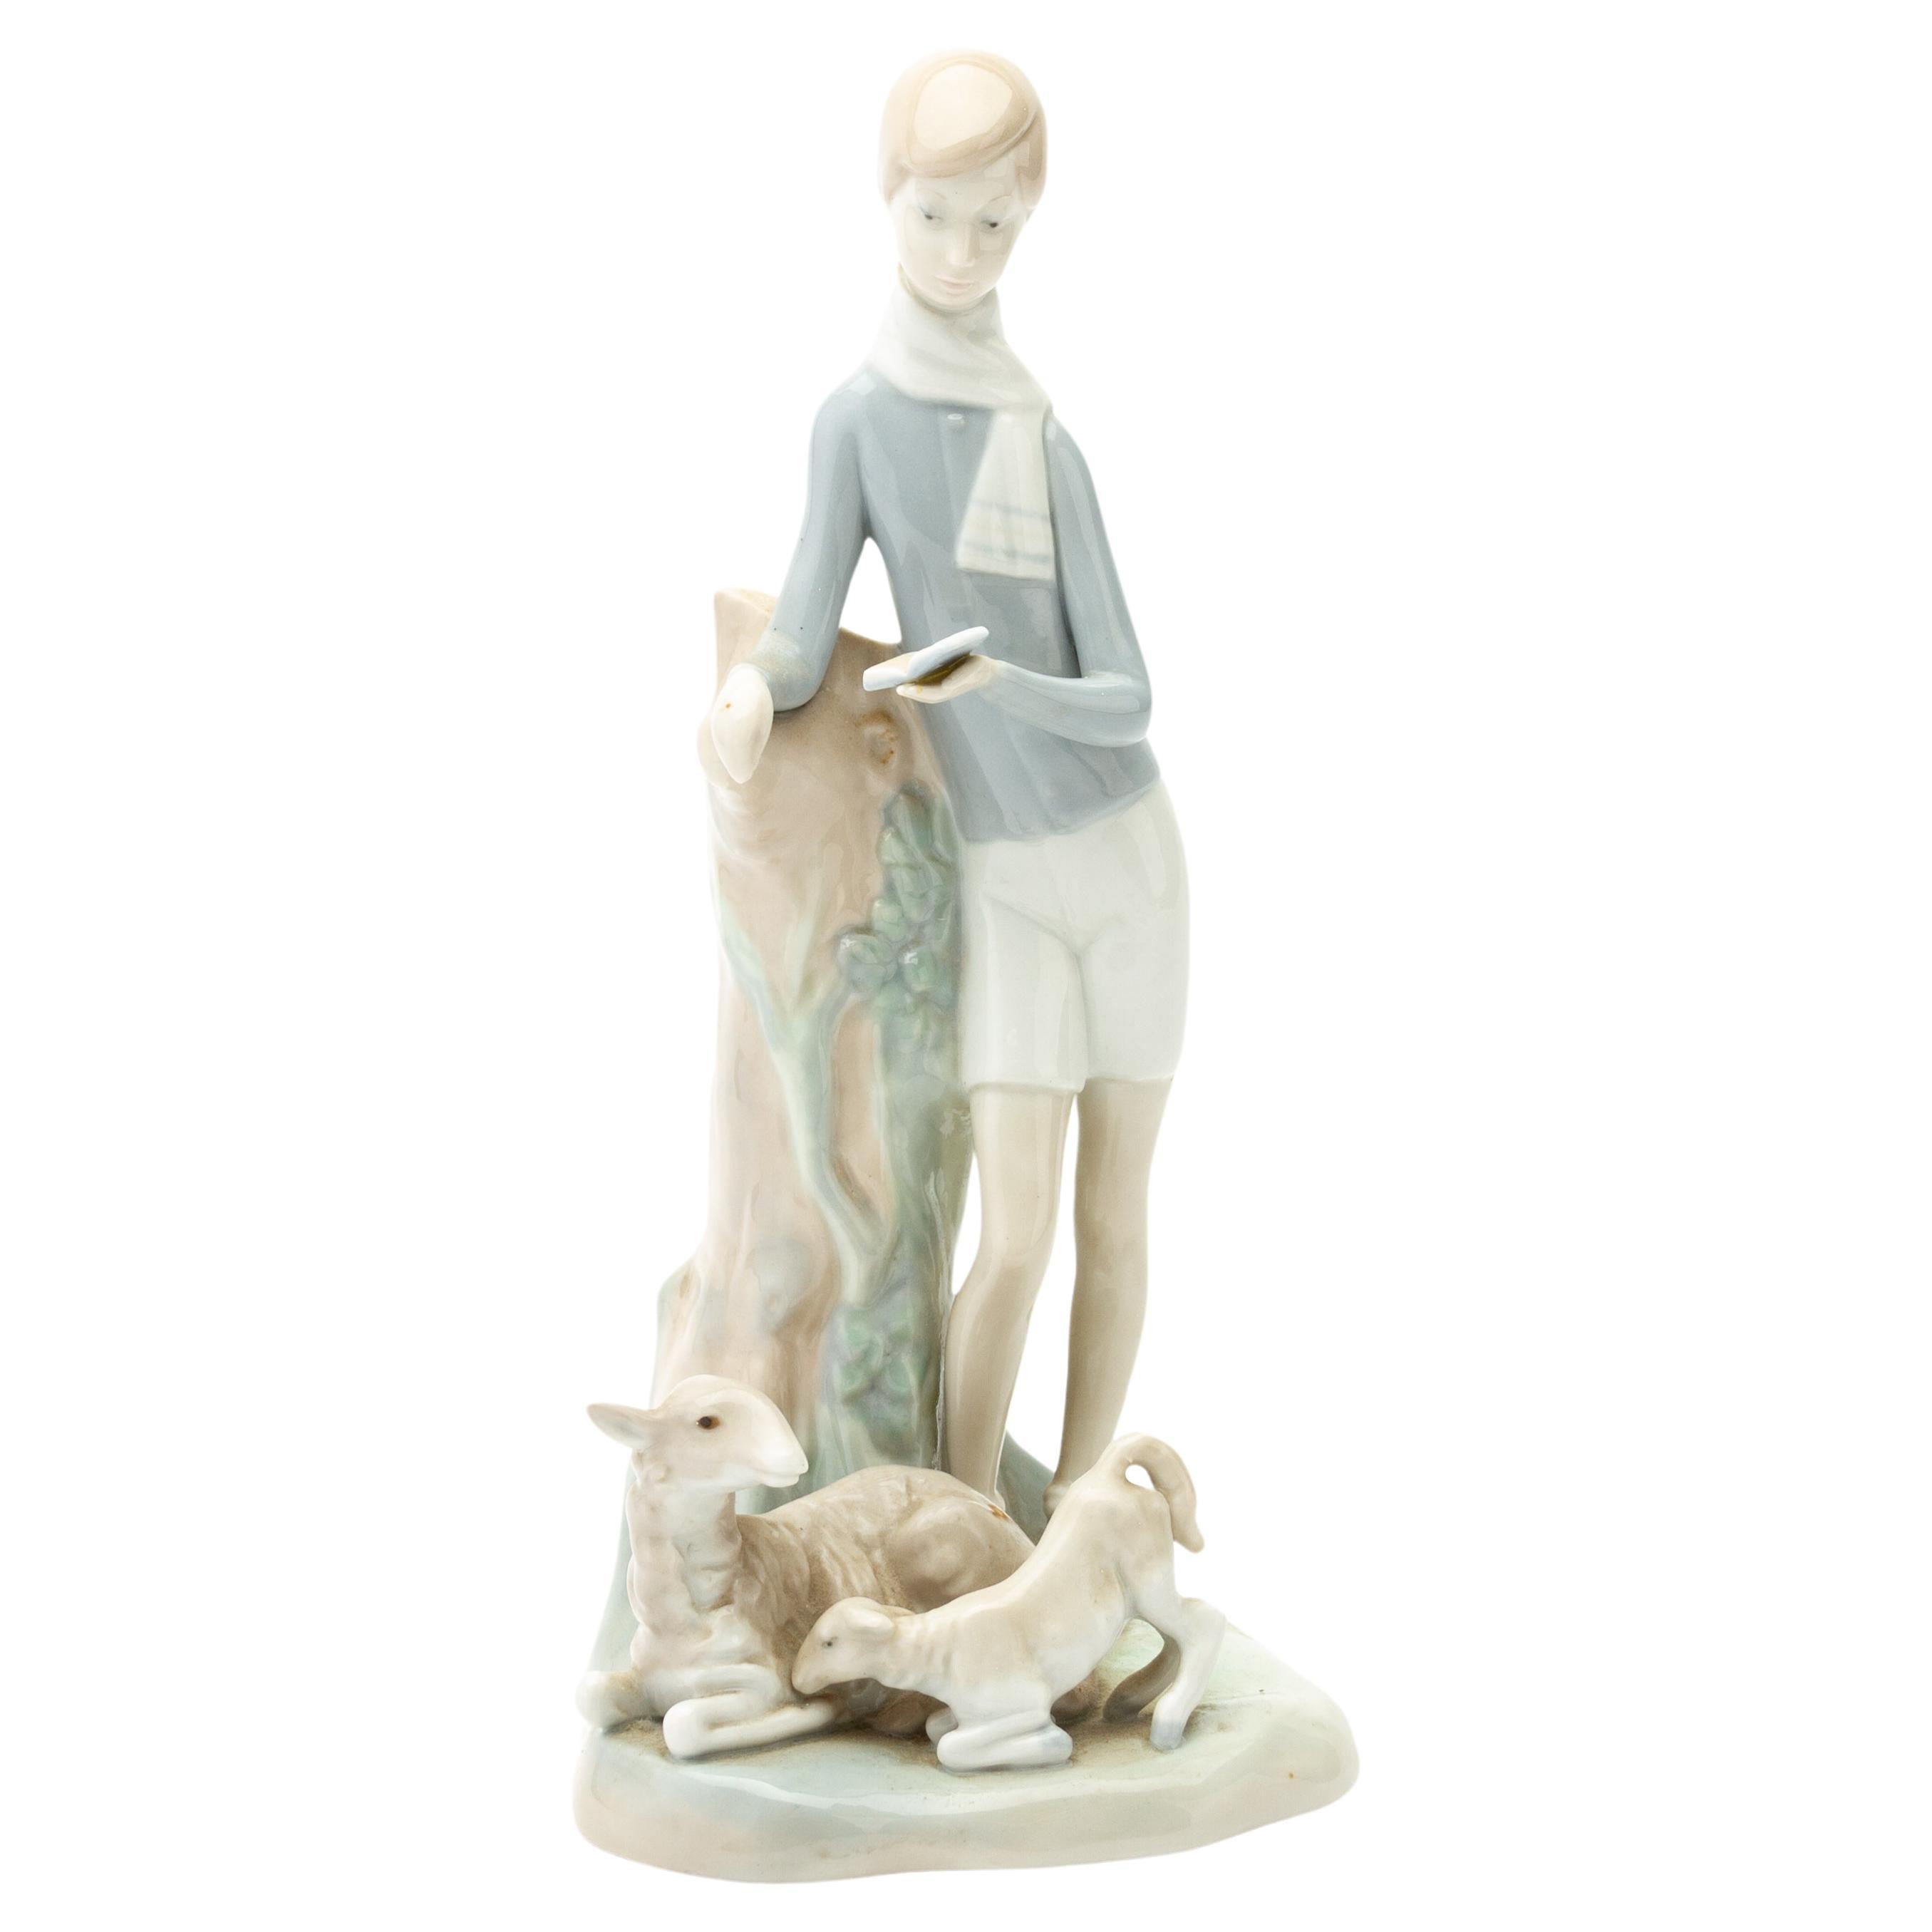 Lladro Fine Porcelain "Boy with Lambs" #4509 Figurine For Sale